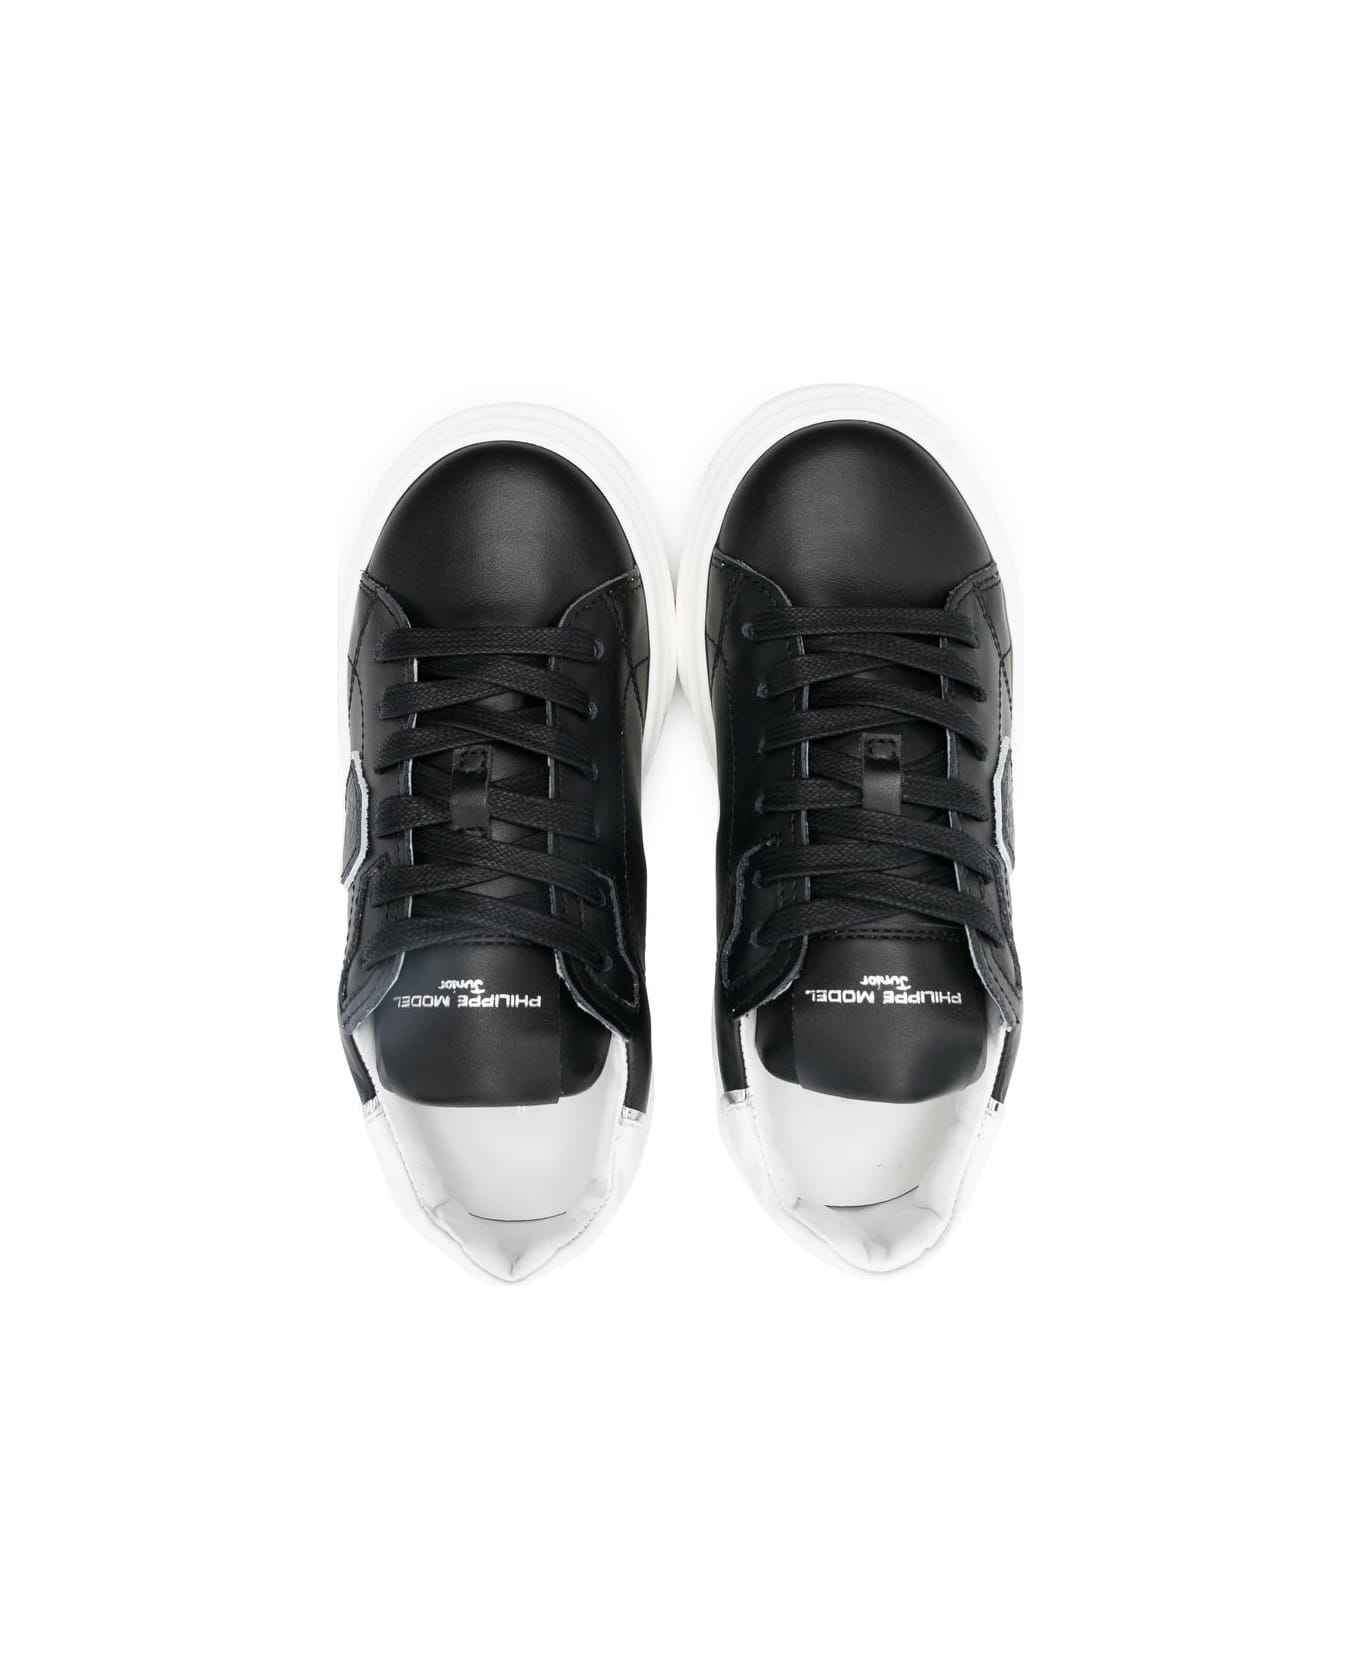 Philippe Model Sneakers With Logo - Black シューズ